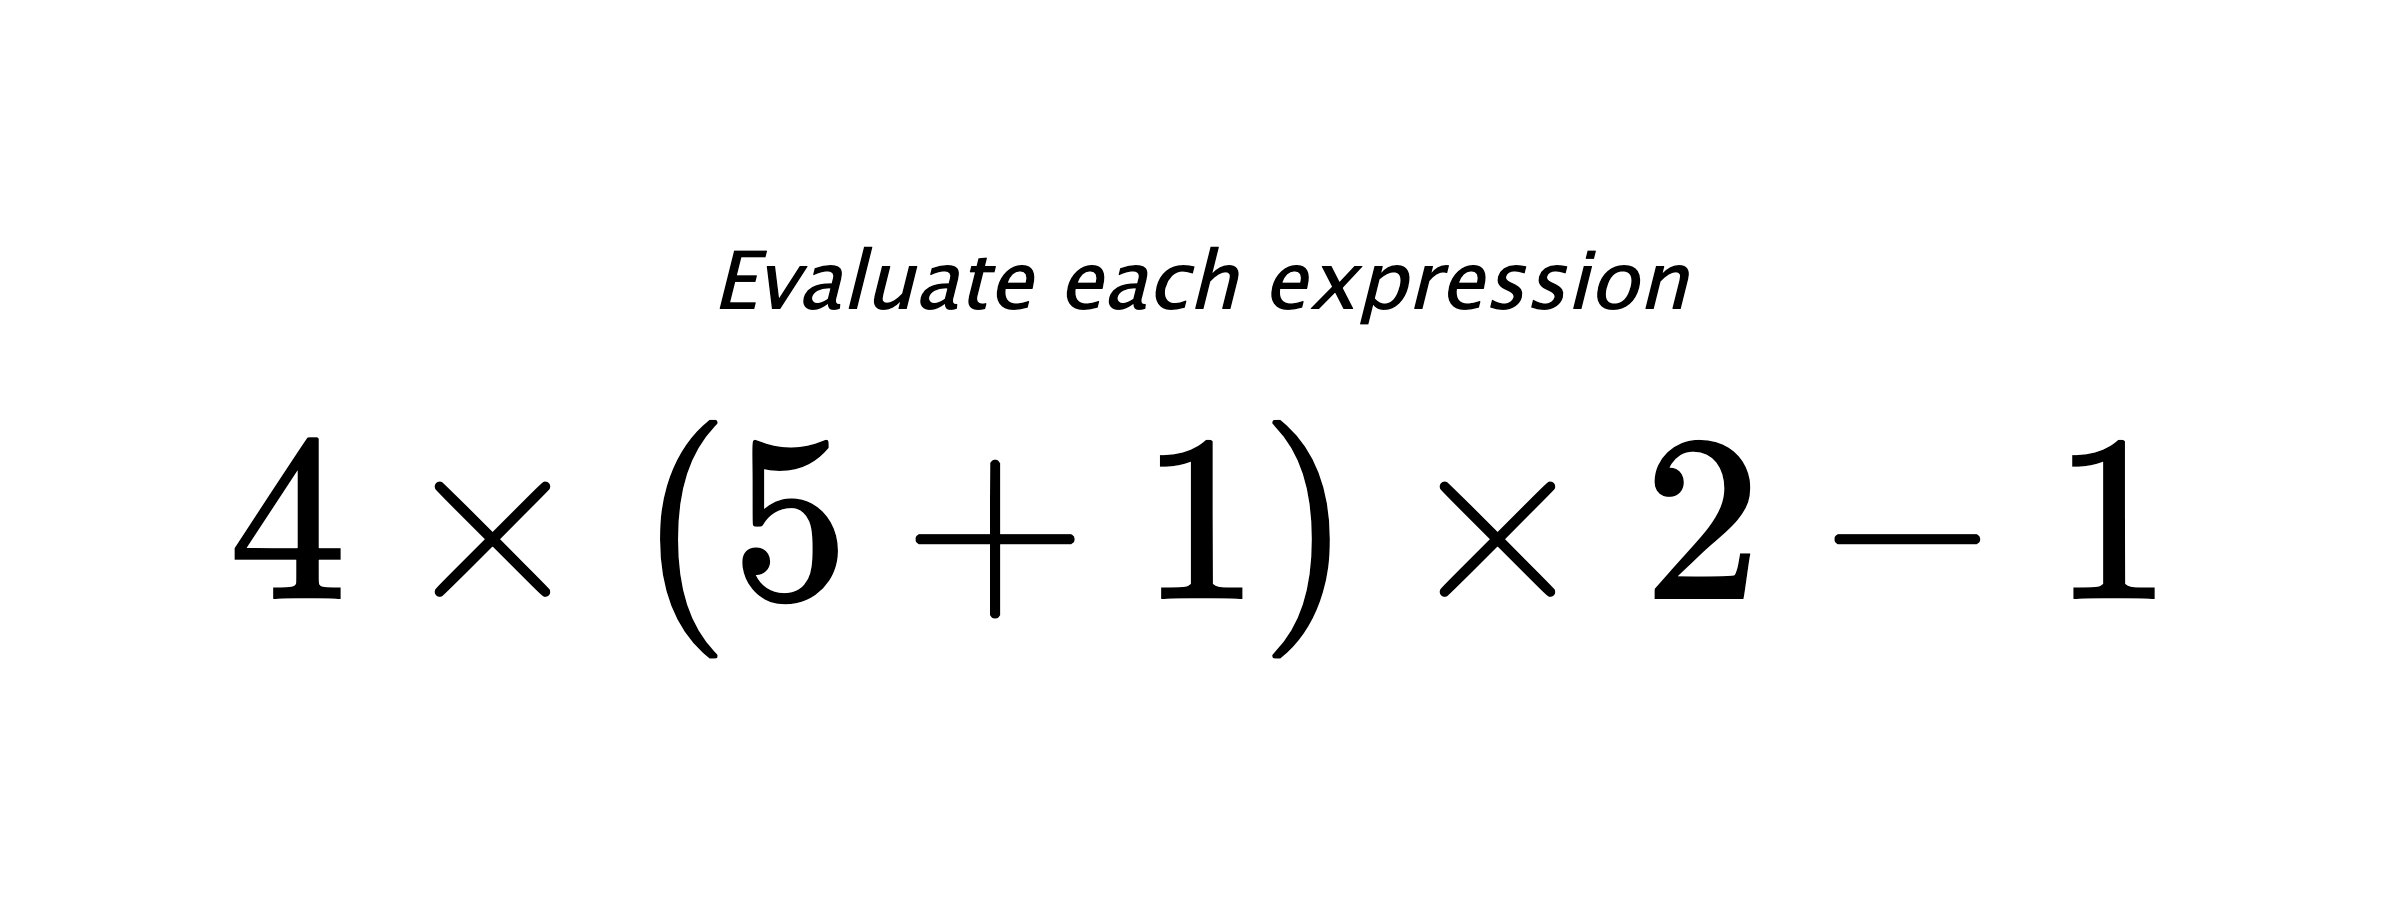 Evaluate each expression $ 4 \times (5+1) \times 2 - 1 $